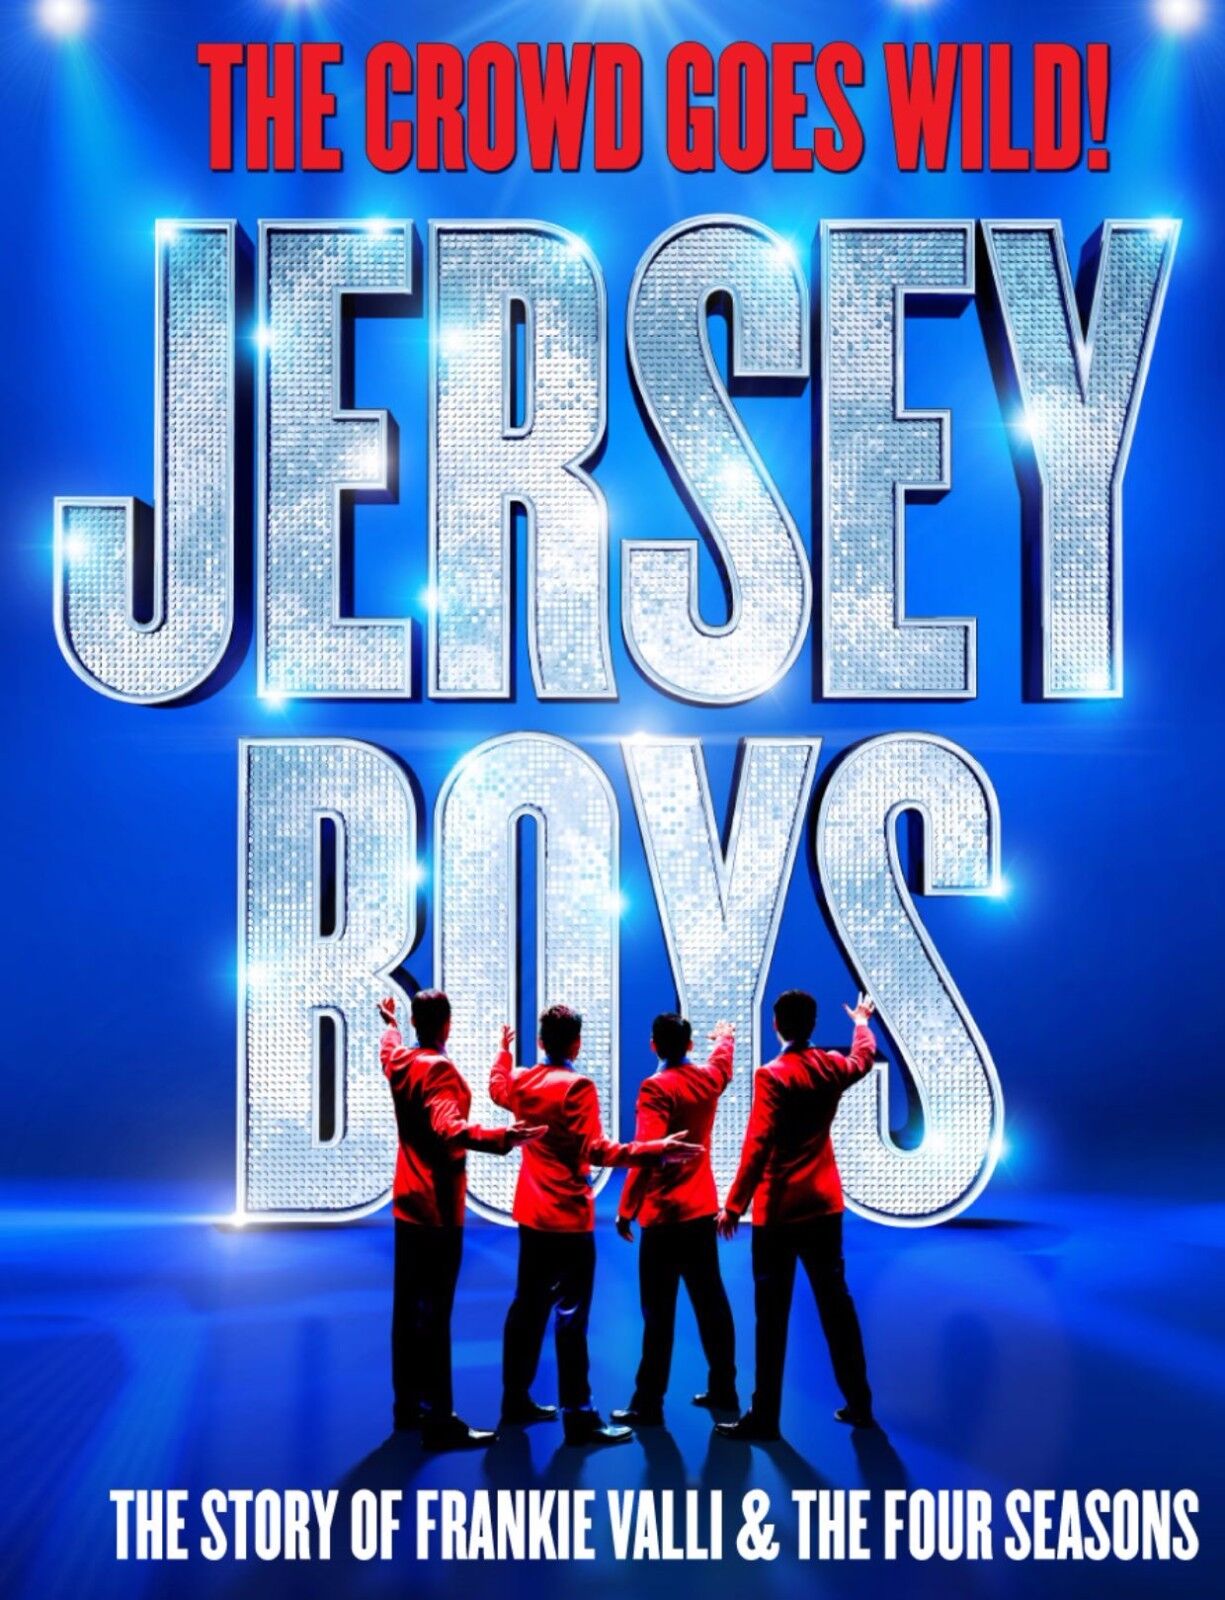 ../images/shows/JerseyBoys.jpg